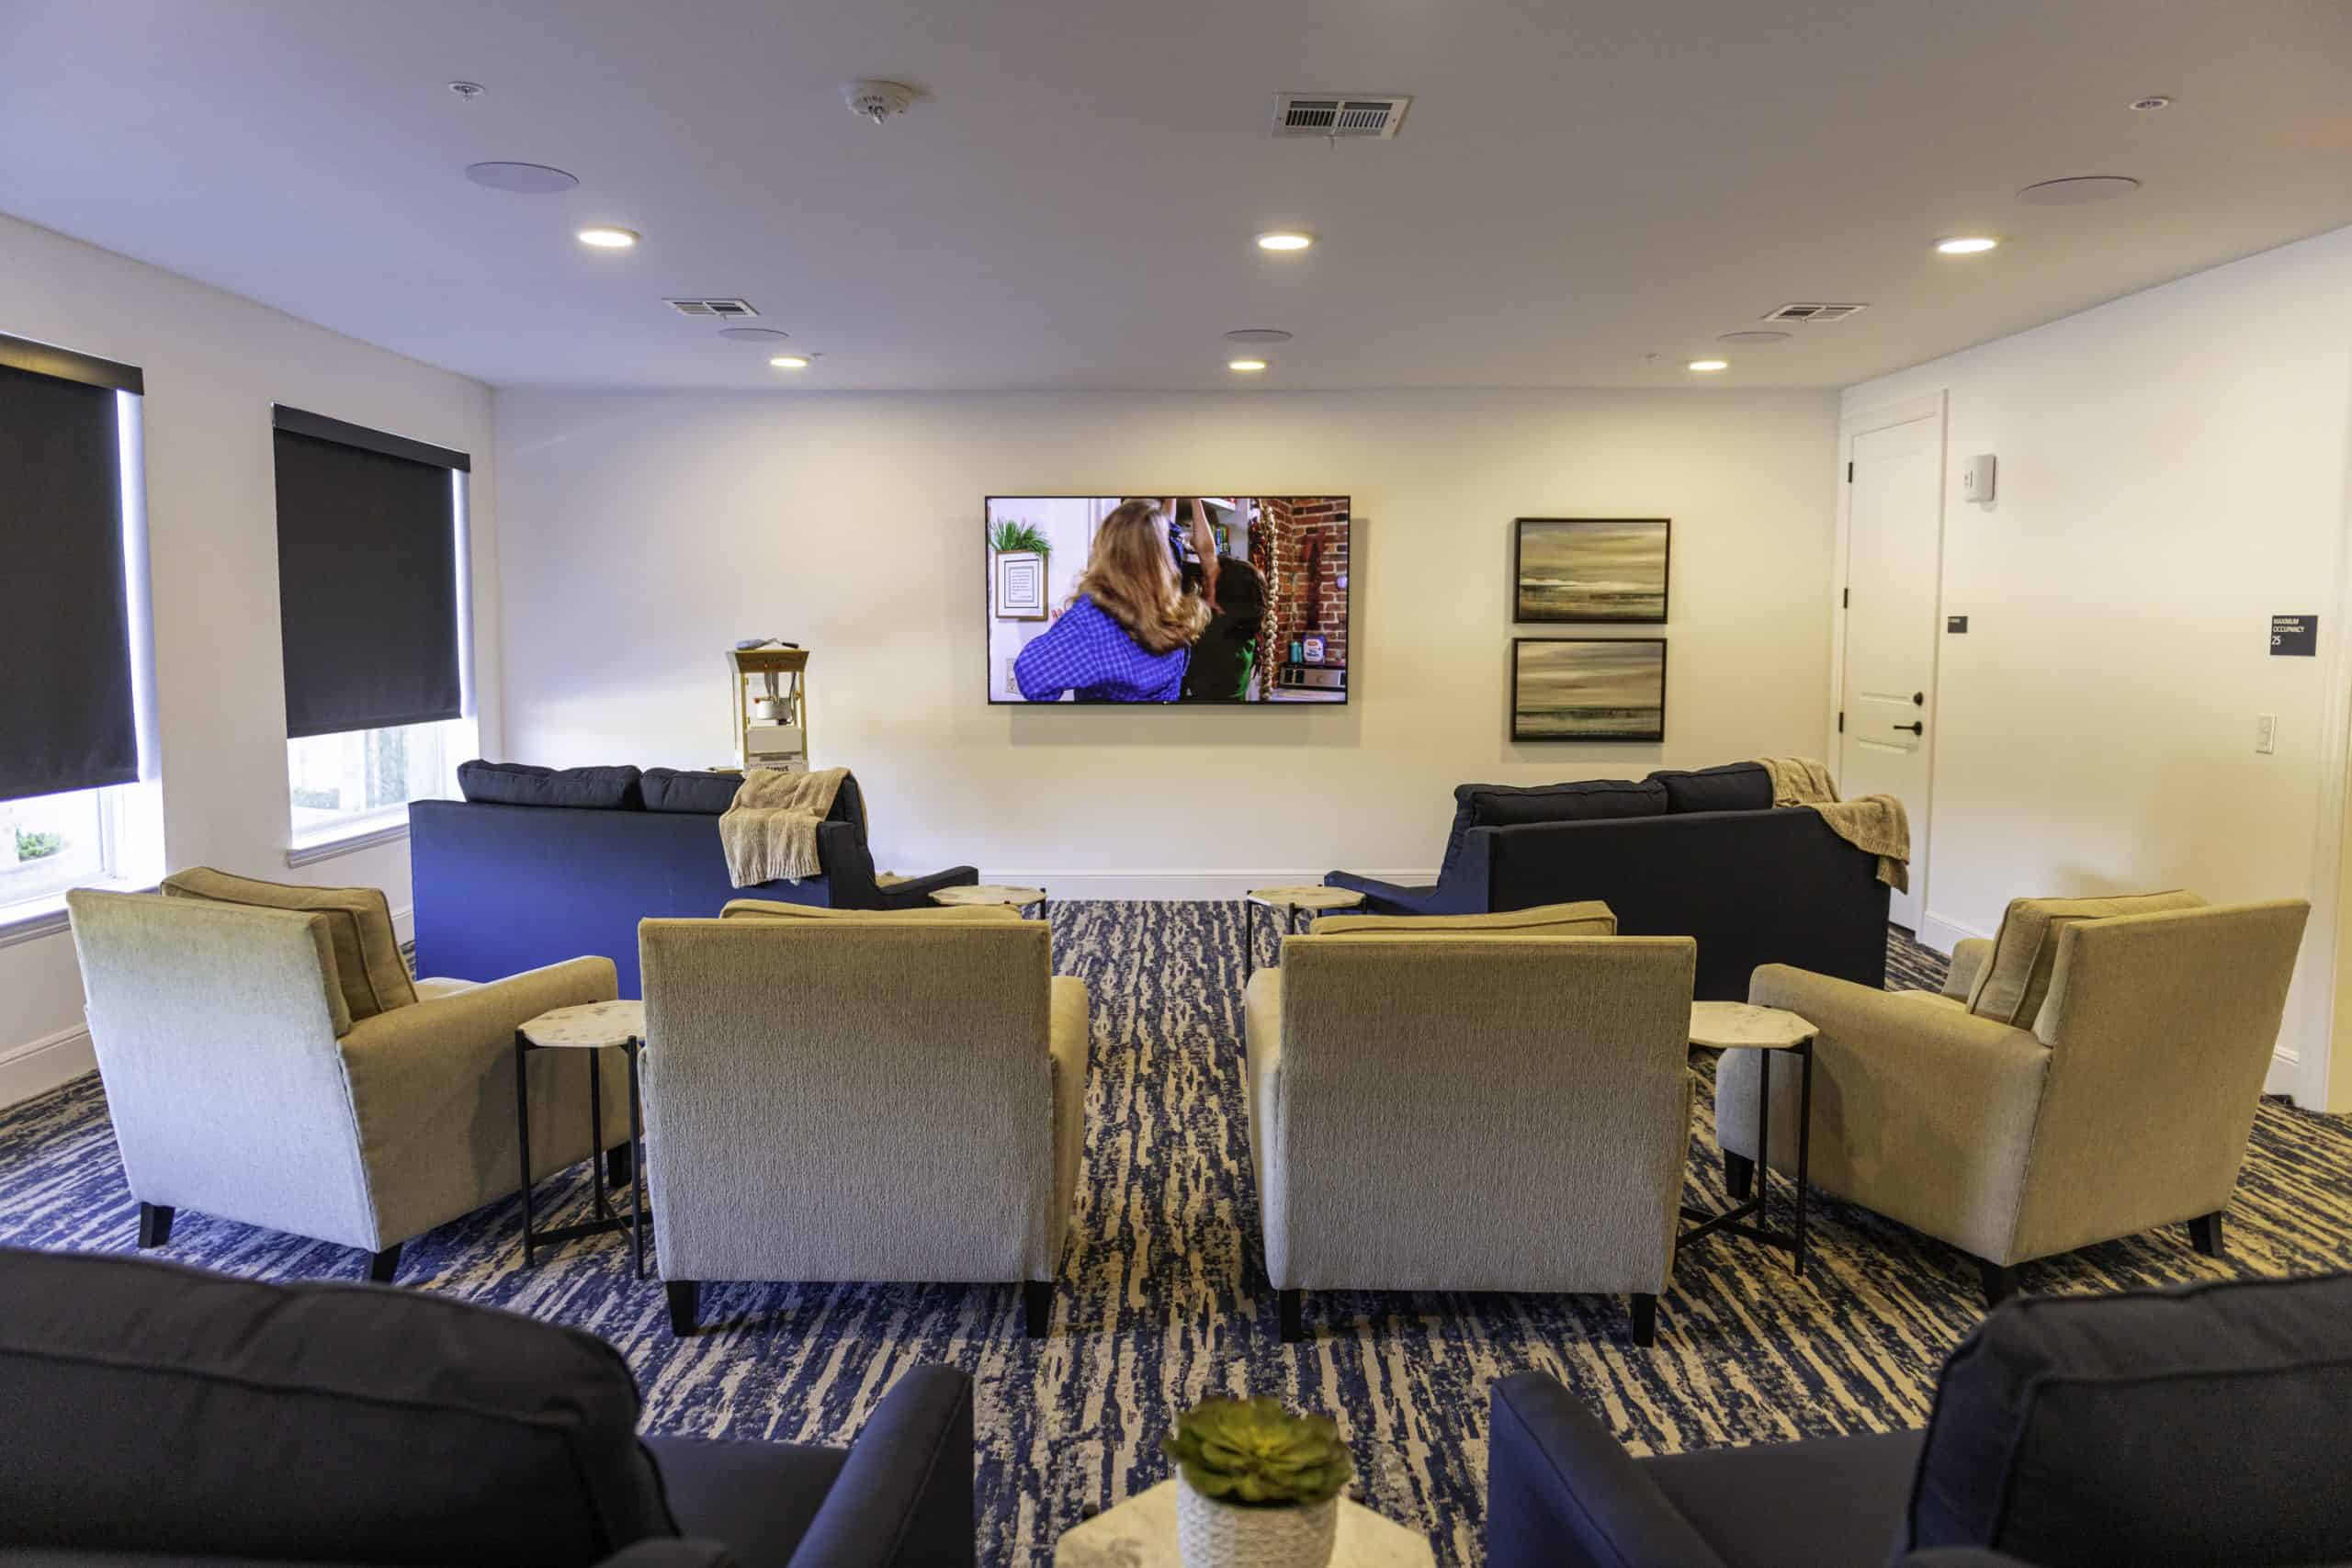 Entertainment lounge and screening room at our 55+ community in Cypress, featuring carpeted flooring and a flat screen TV.